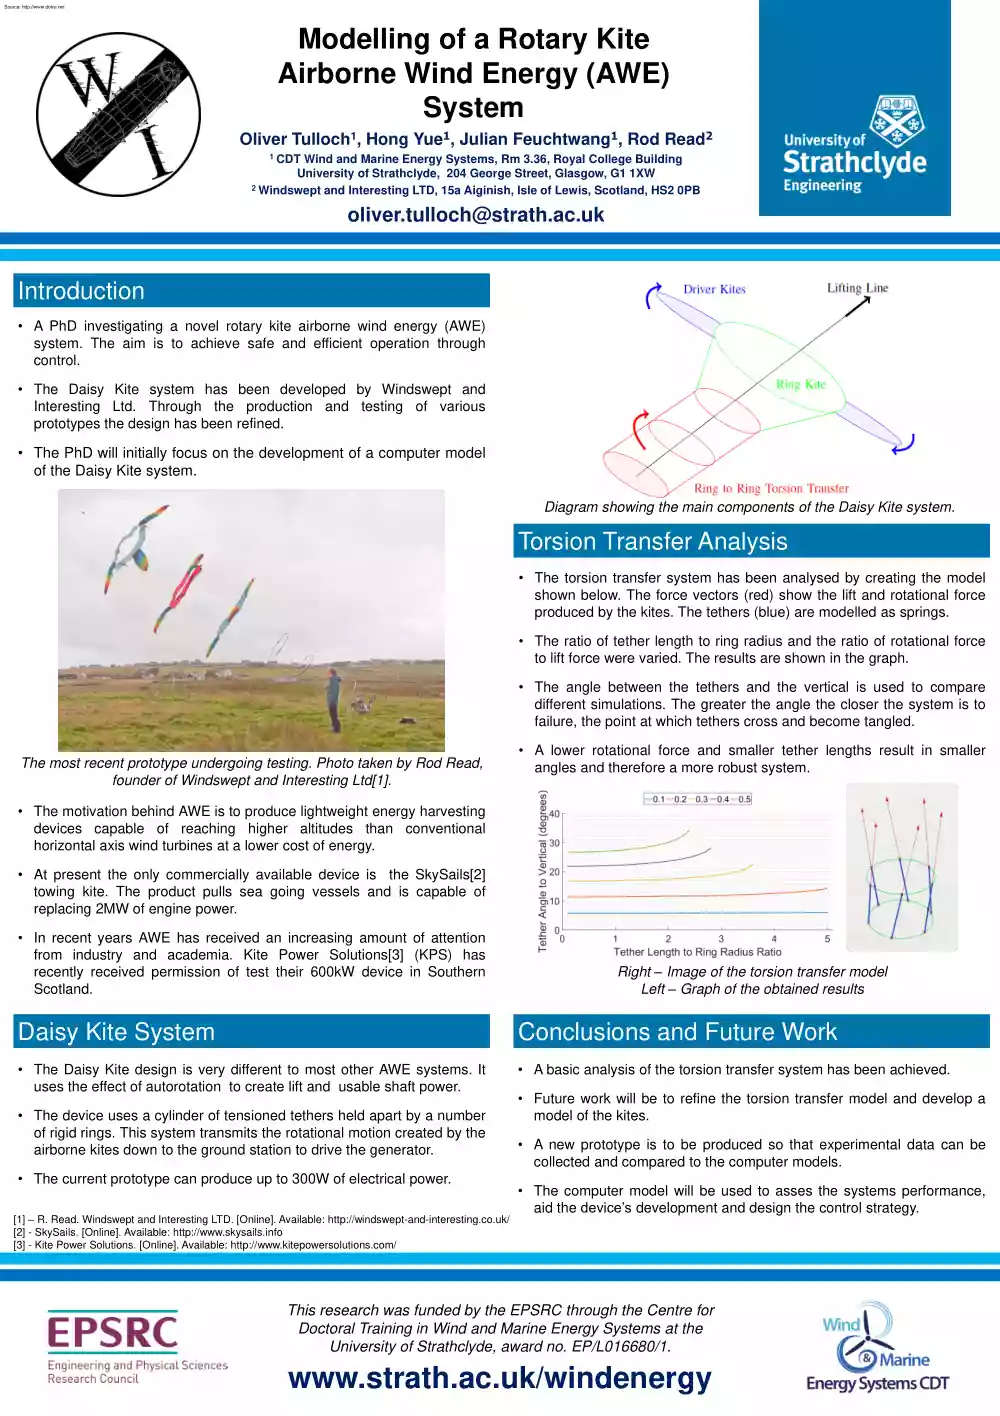 Tulloch-Yue-Feuchtwang - Modelling of a Rotary Kite Airborne Wind Energy (AWE) System